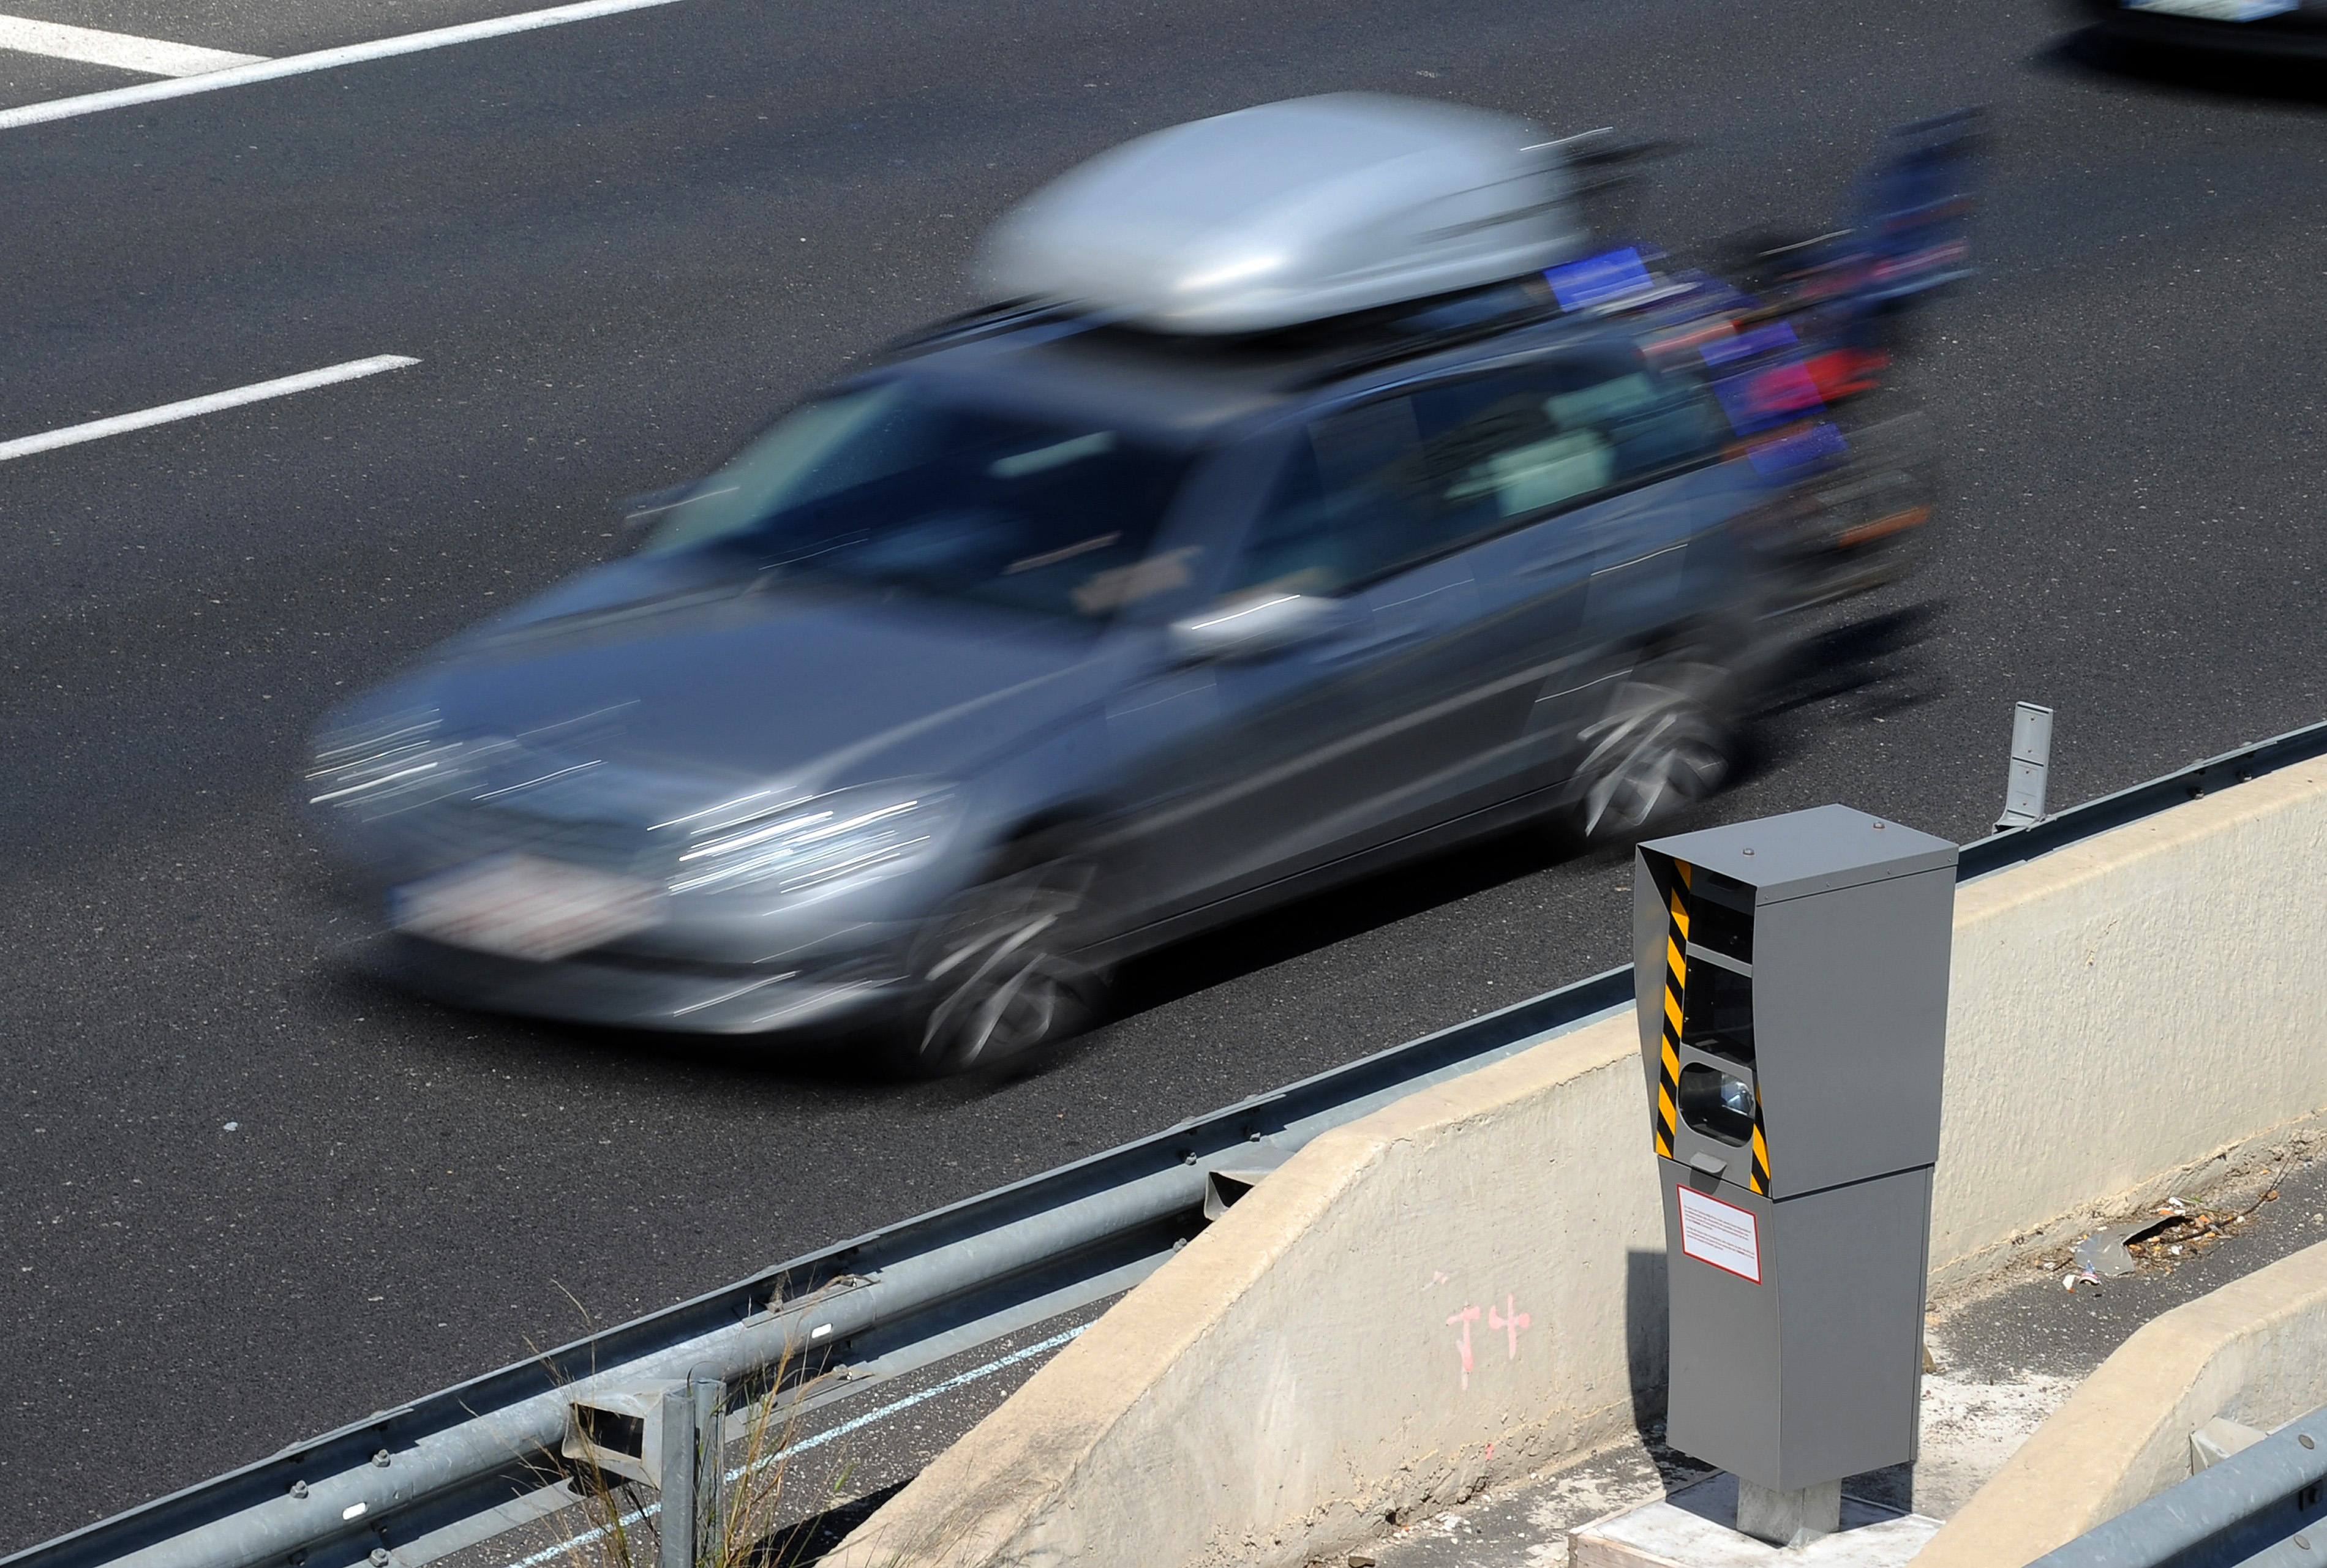 A picture taken on April 3, 2013 in Saint-Aunes-Odysseum shows motor vehicules driven in front of a radar on the A9 motorway. AFP PHOTO / PASCAL GUYOT (Photo by Pascal GUYOT / AFP) (Photo by PASCAL GUYOT/AFP via Getty Images)